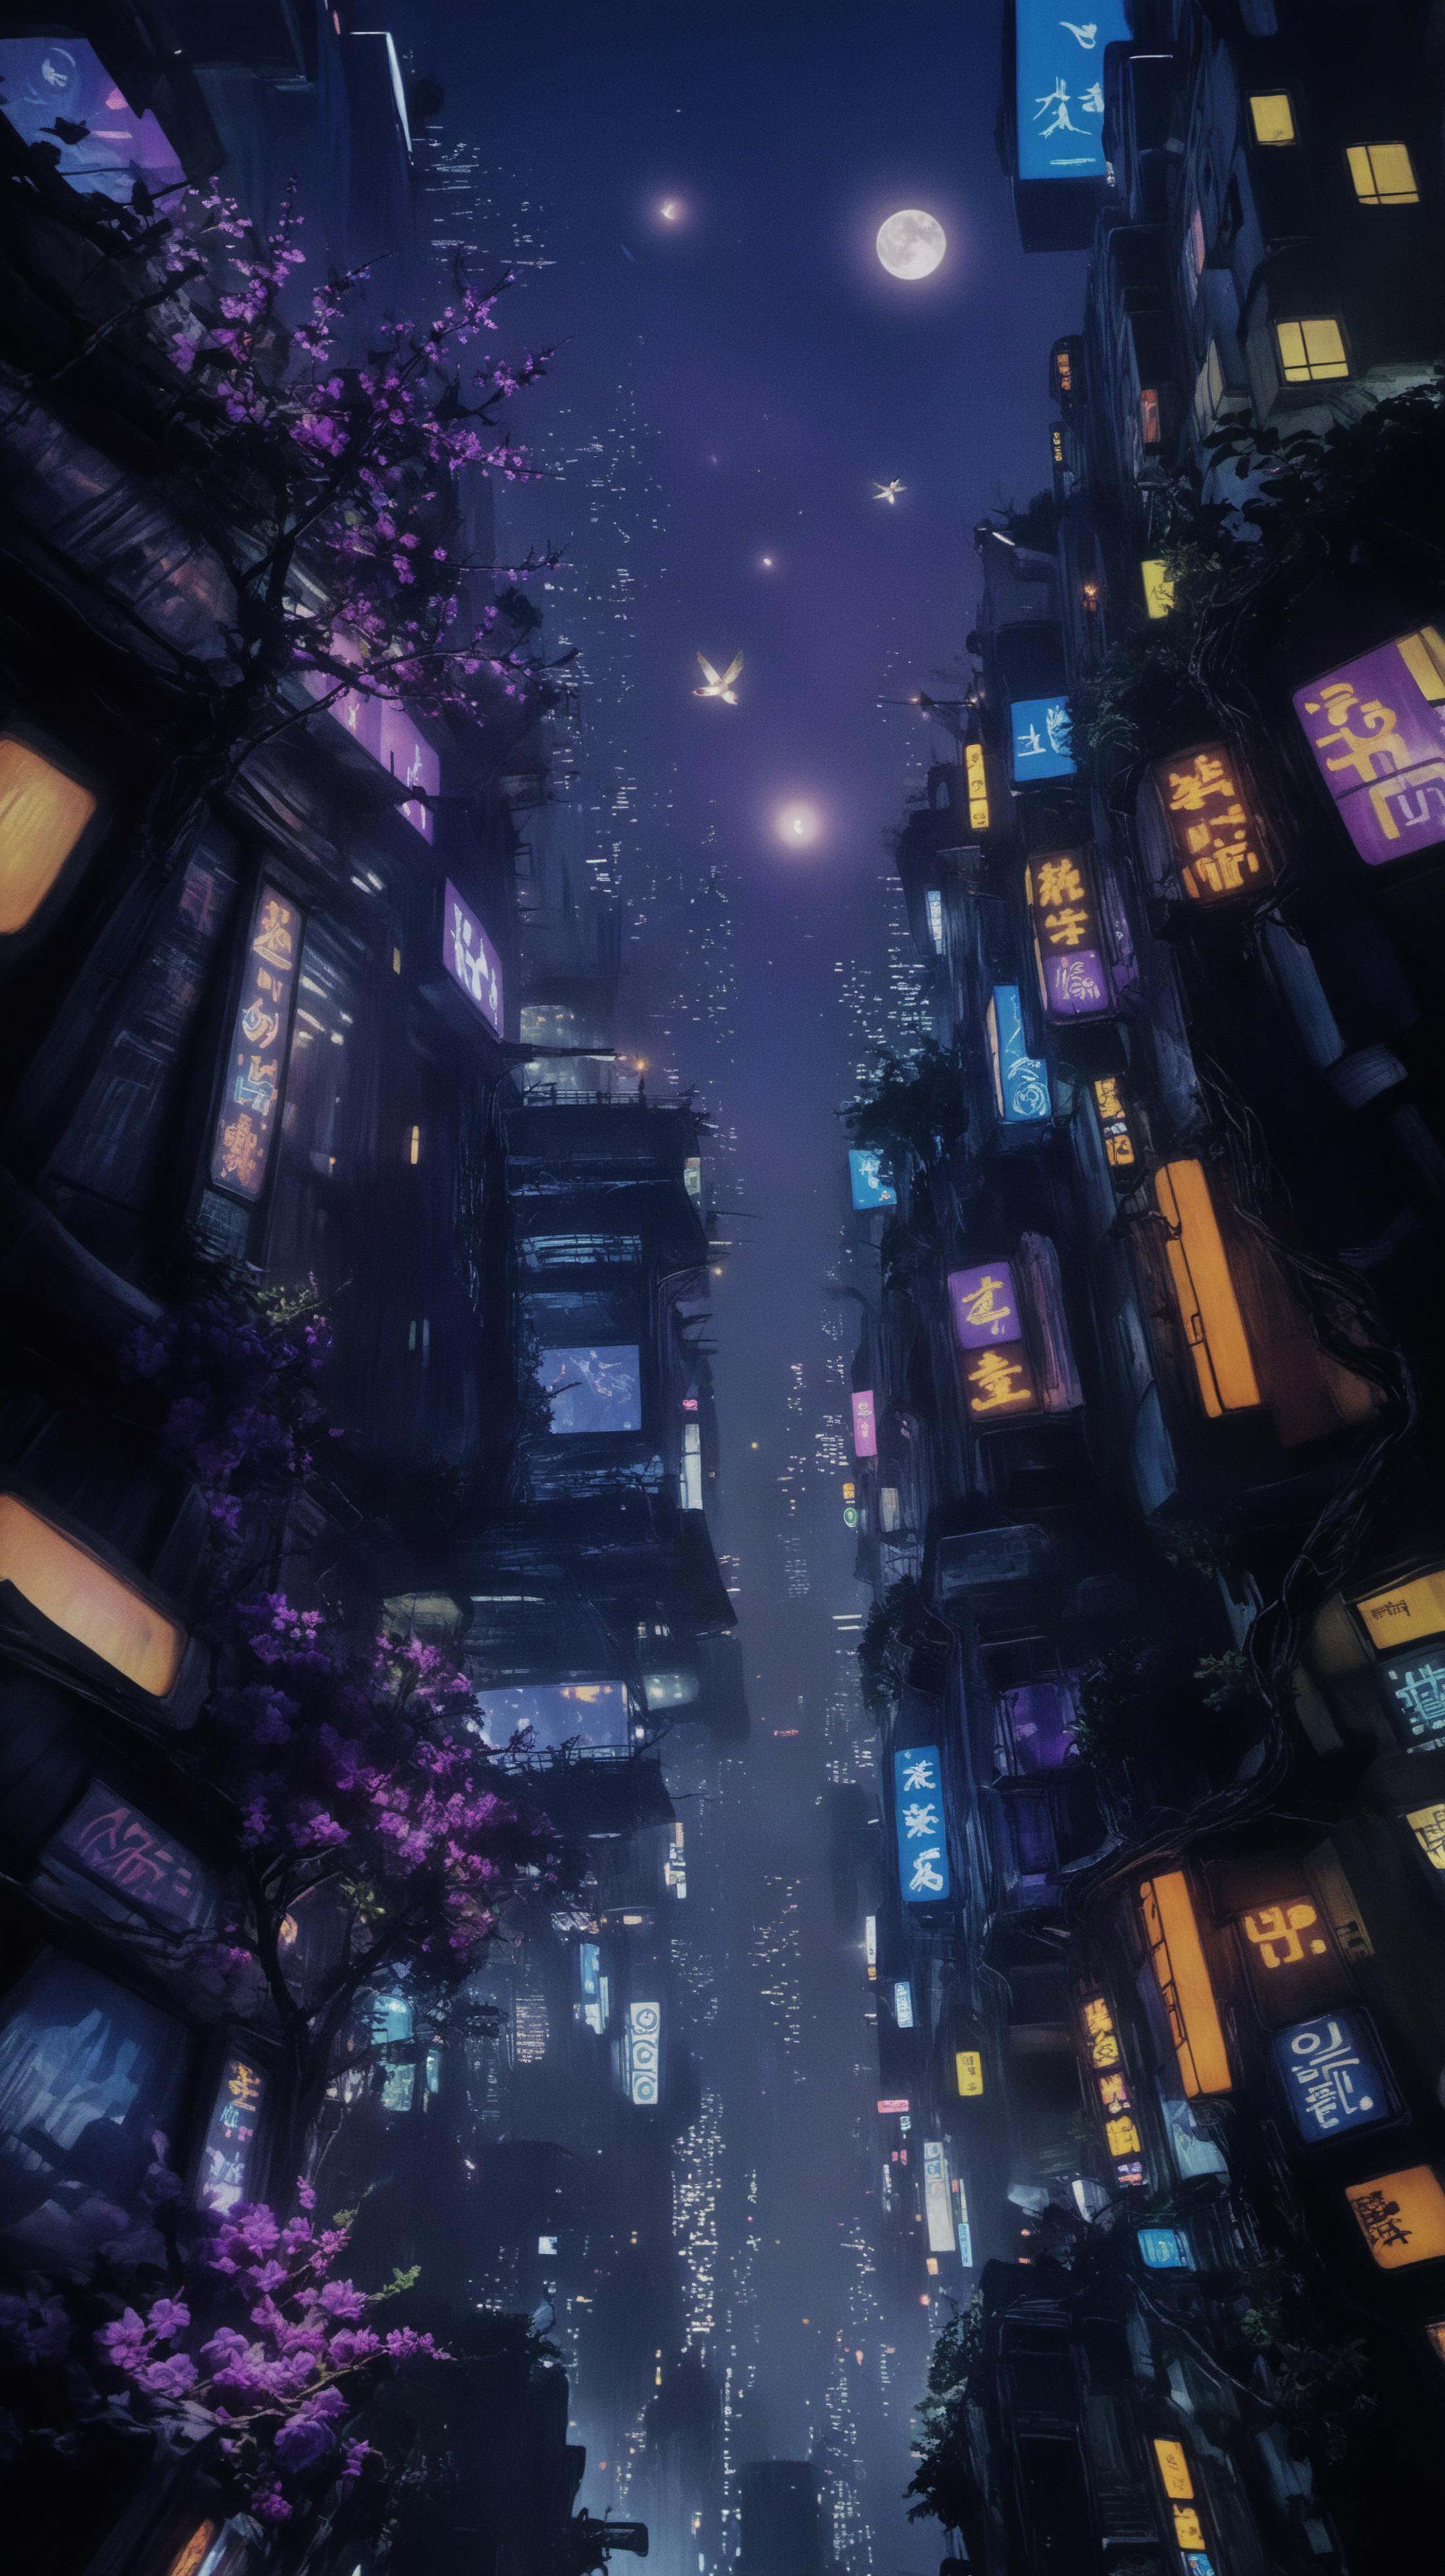 A City at Night with Tall Buildings, Purple Flowers, and Chinese Characters on the Signs